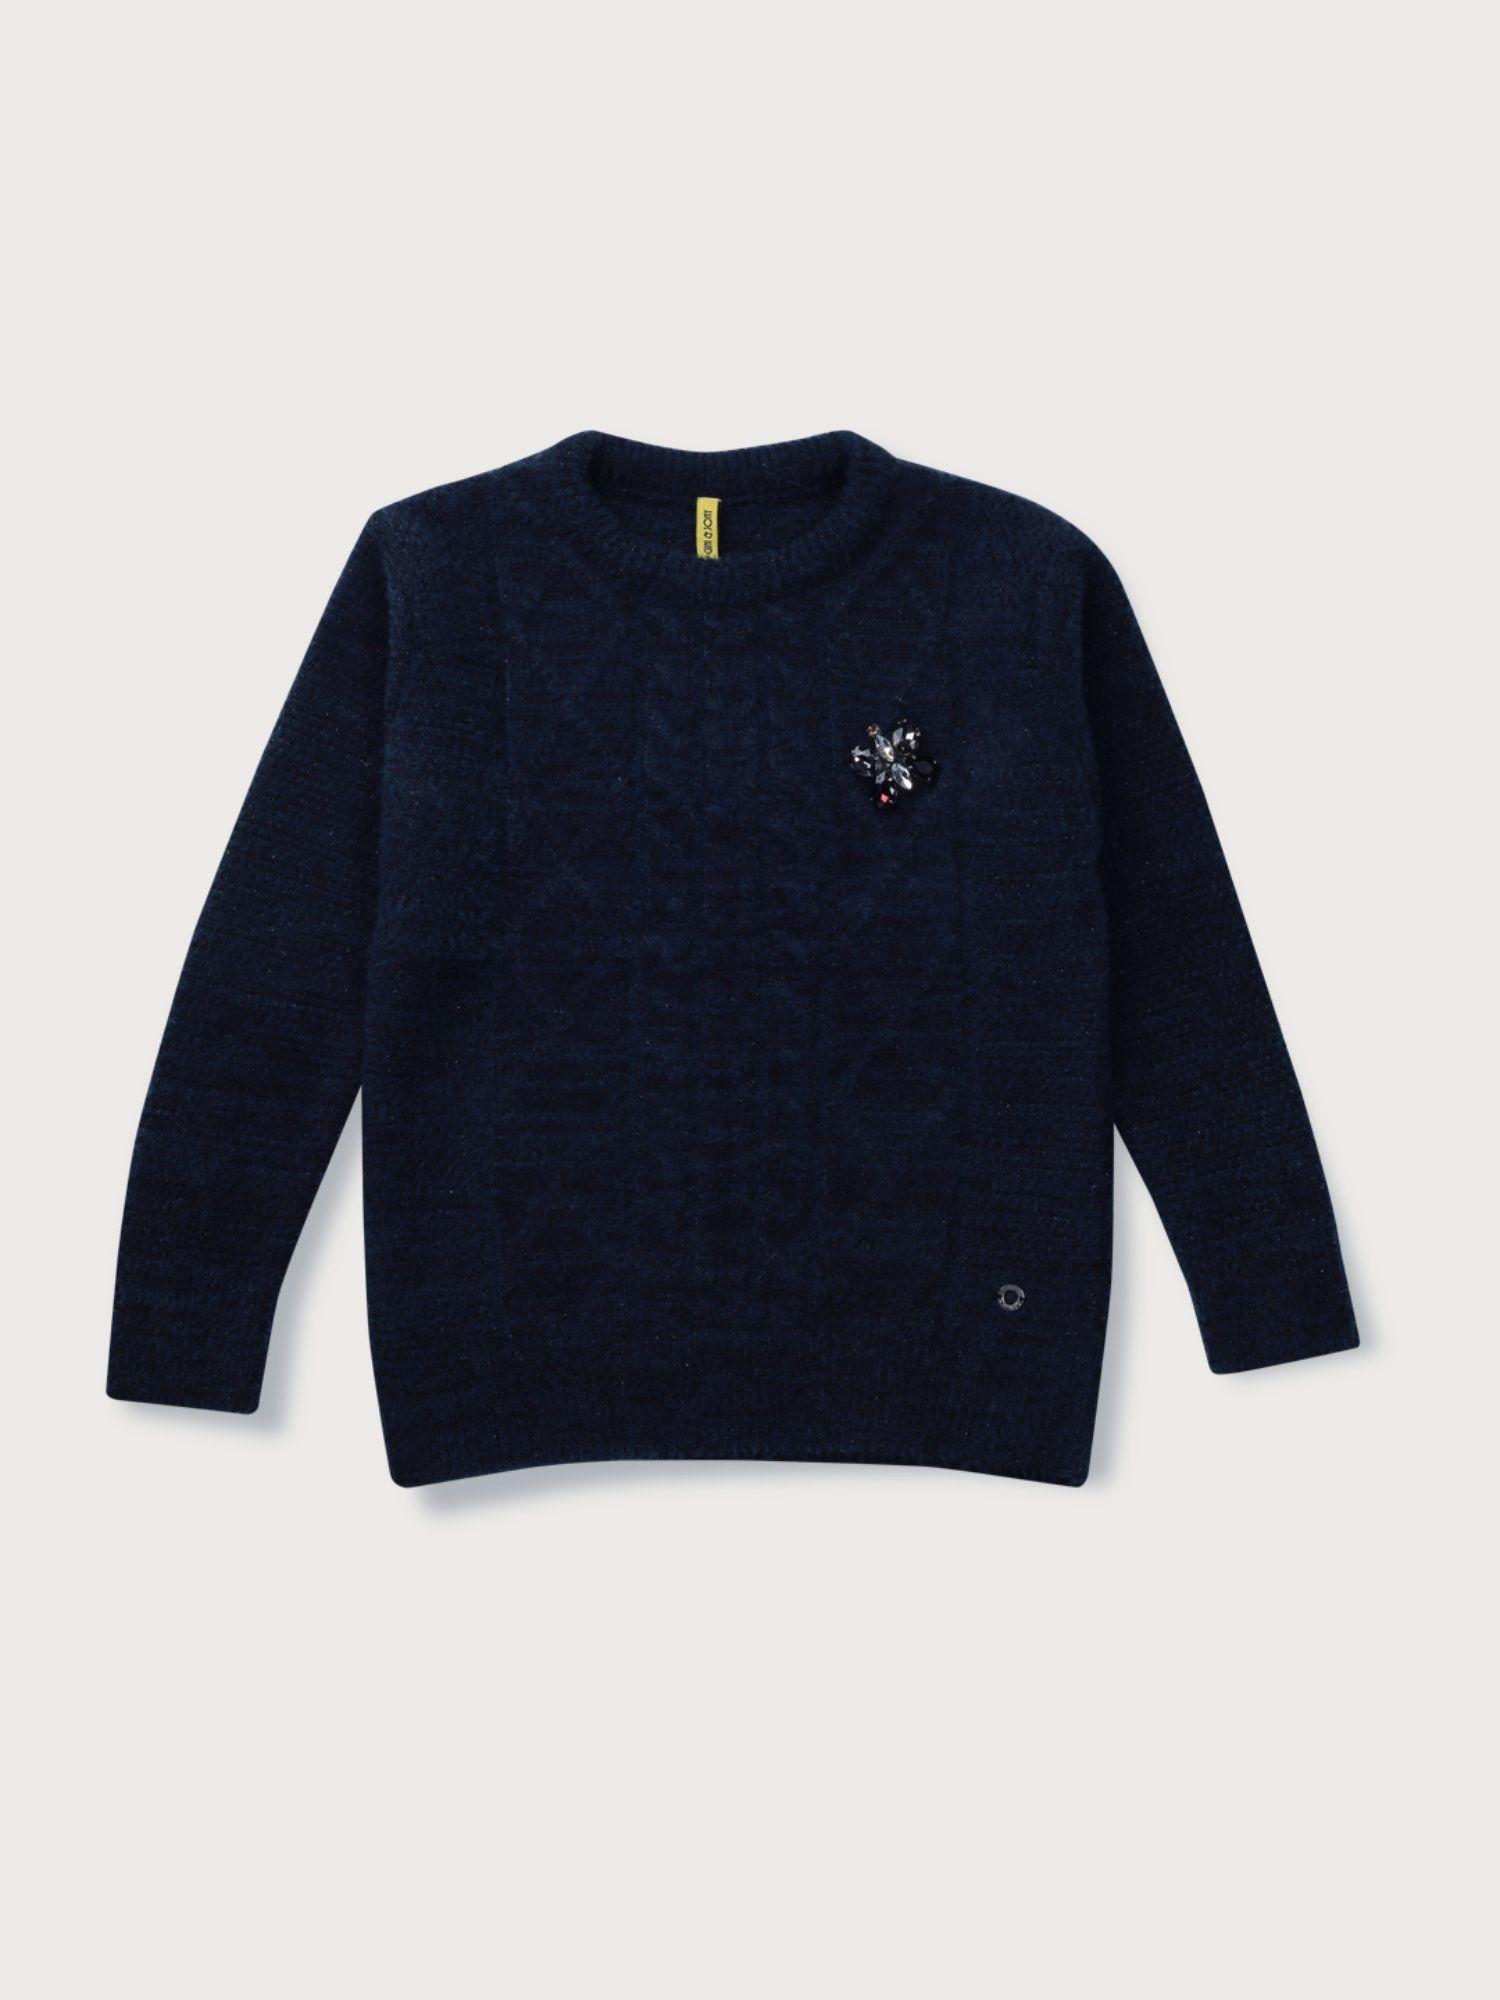 girls navy blue woven cotton sweater full sleeves